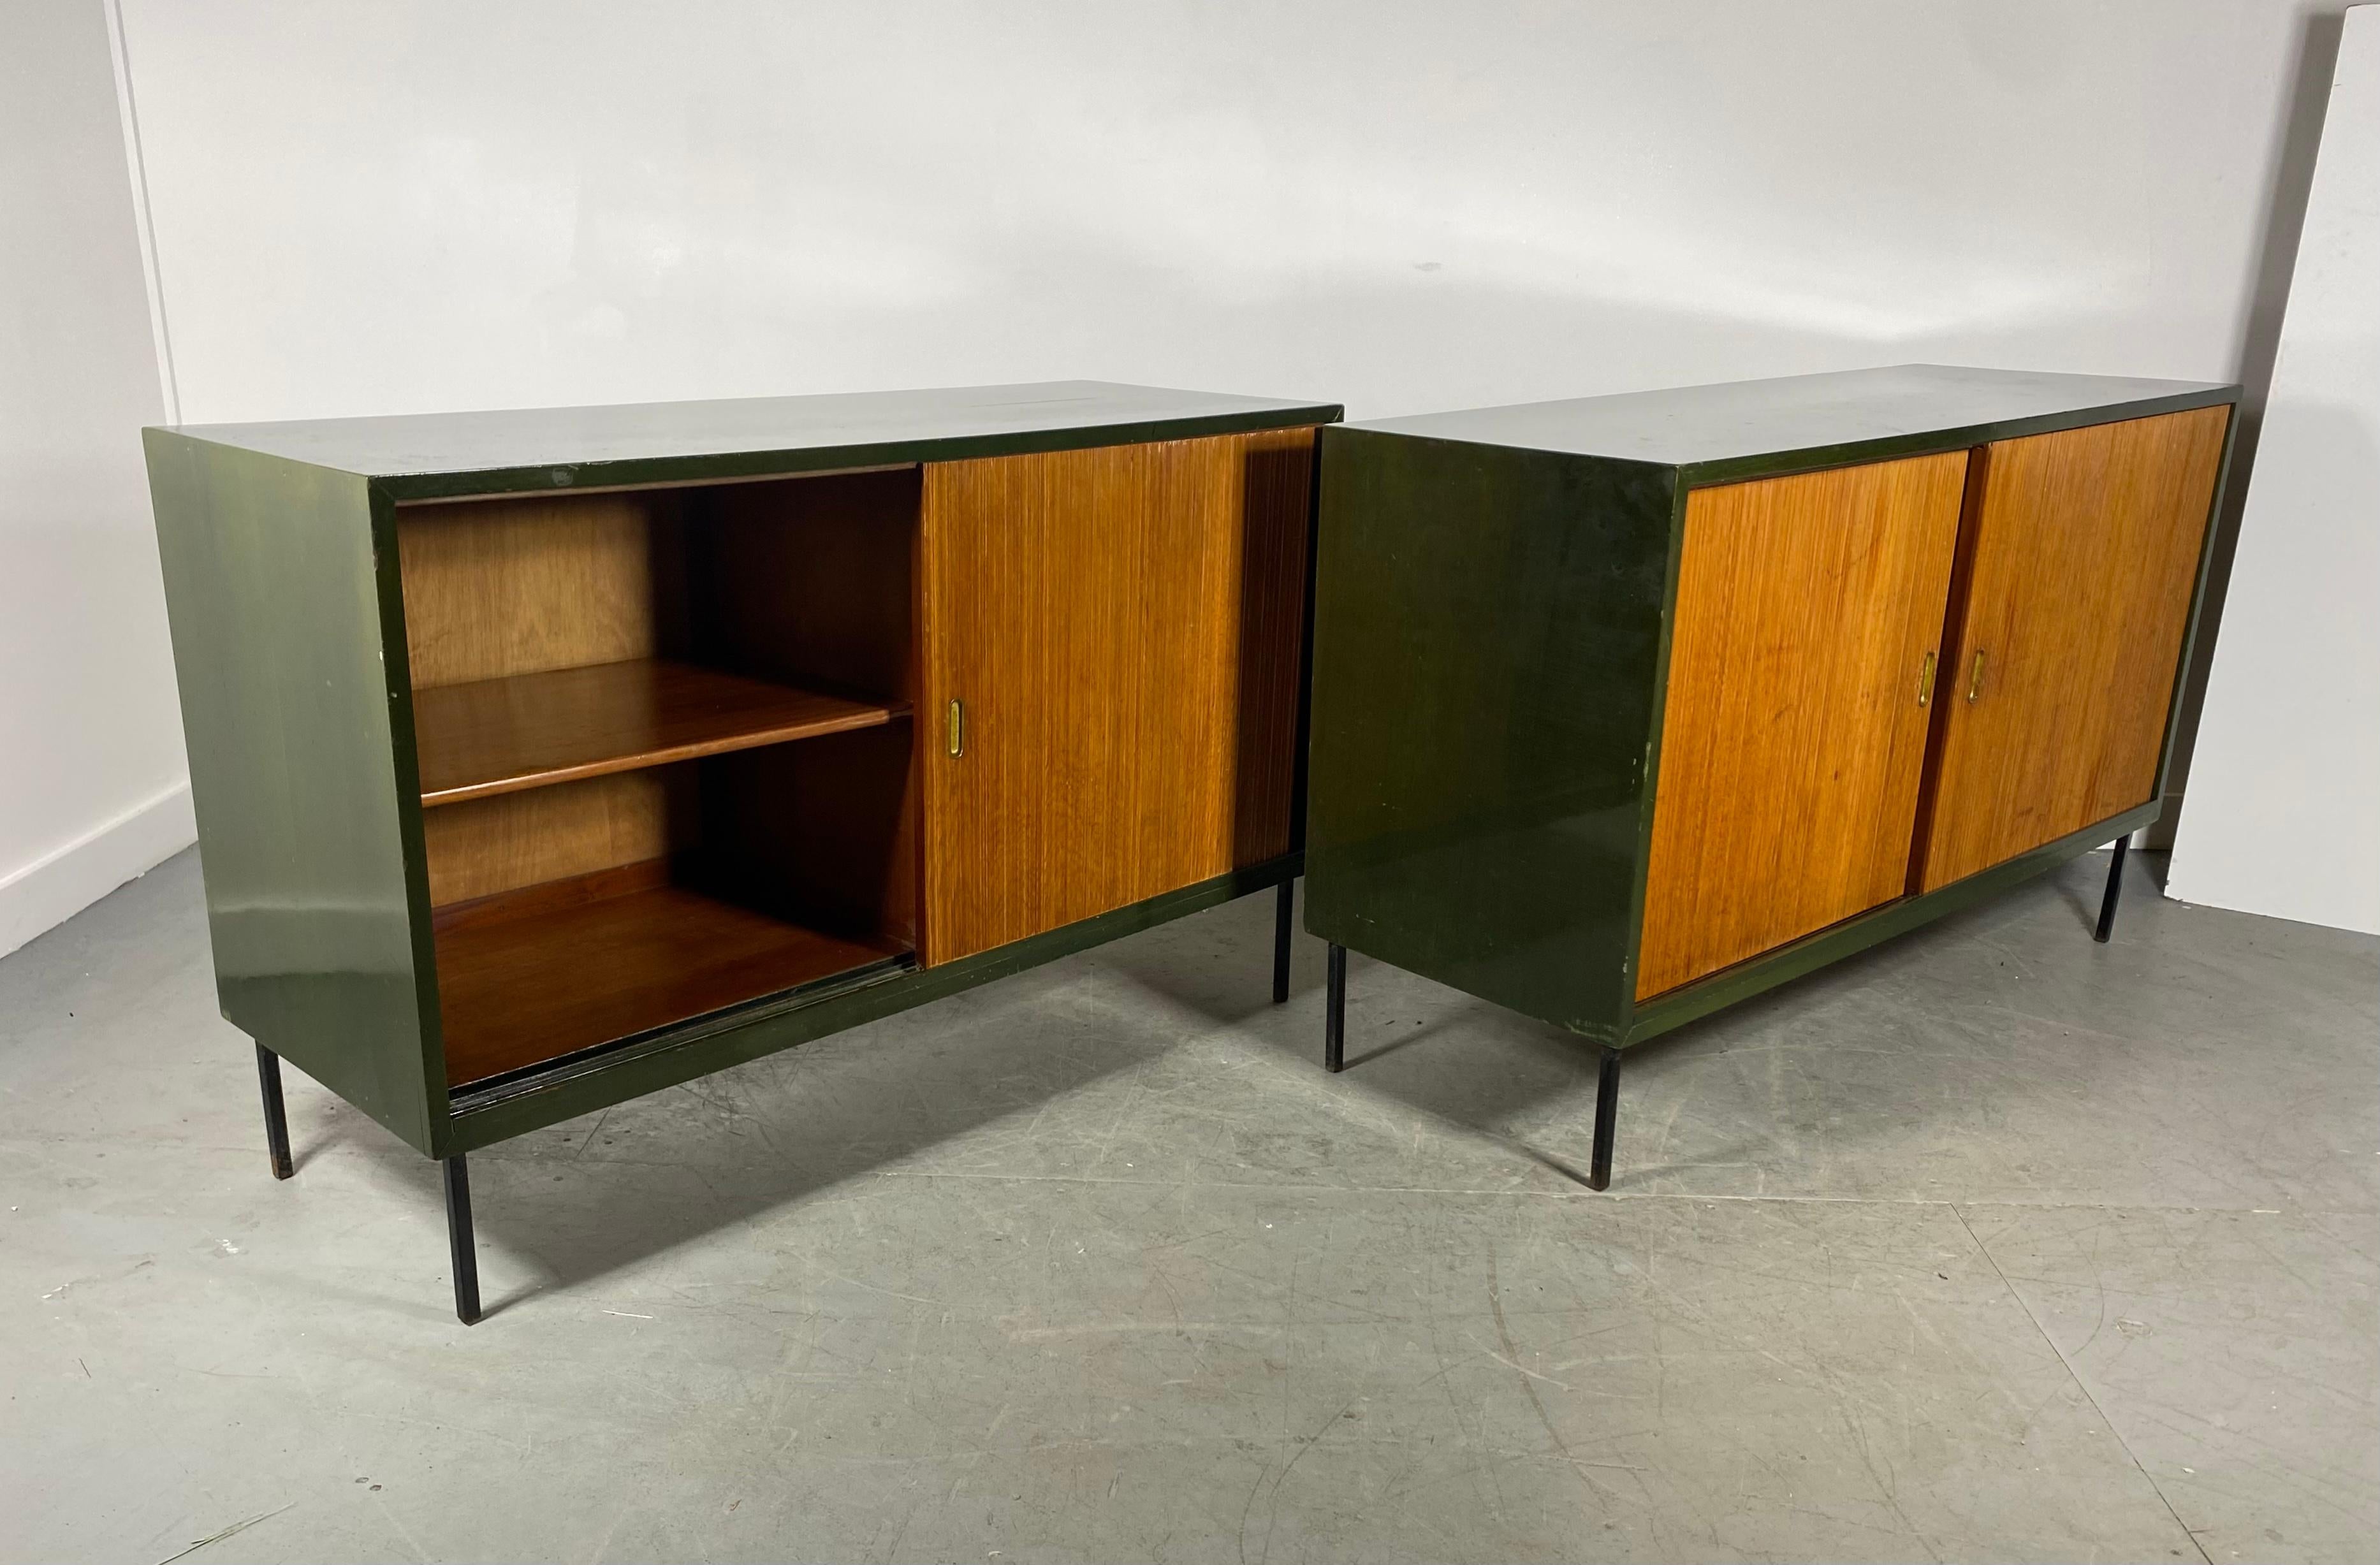 Interplan Unit 'K' Lacquered Sideboard by Robin Day for Hille, 1950s For Sale 8